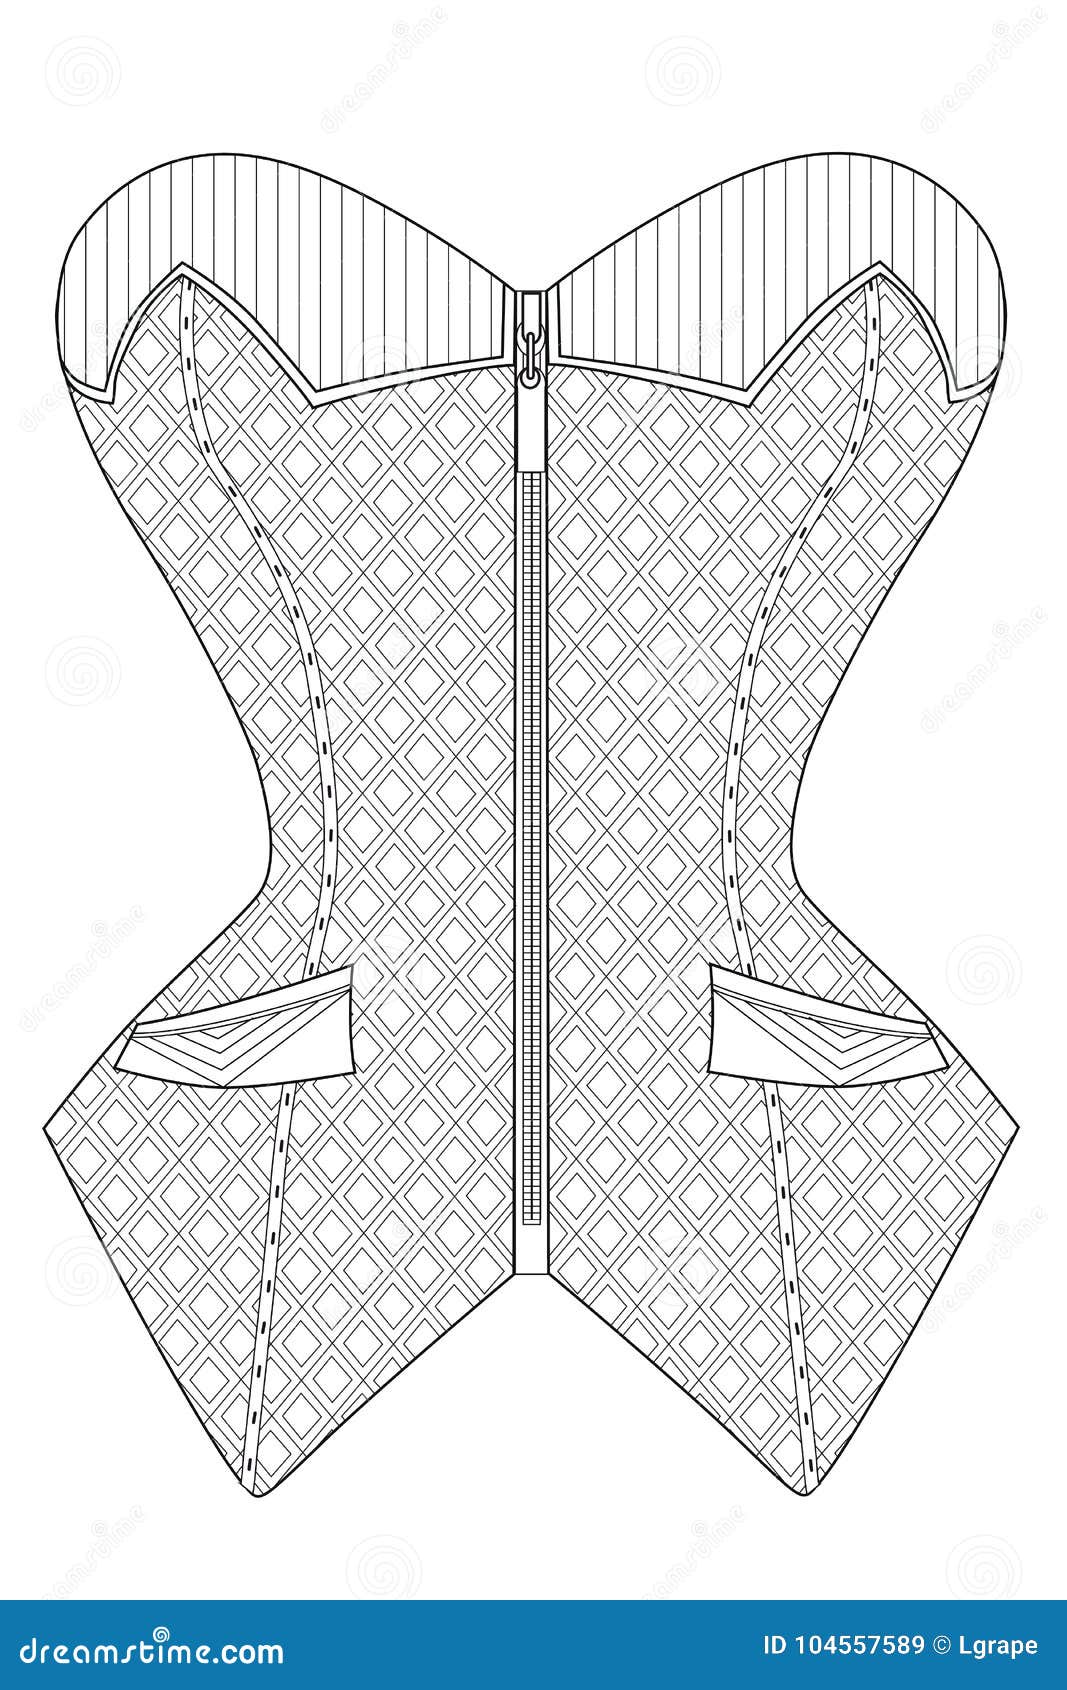 Download Coloring Page For Adults. Plaid Corset. Stock Vector - Illustration of fashion, black: 104557589